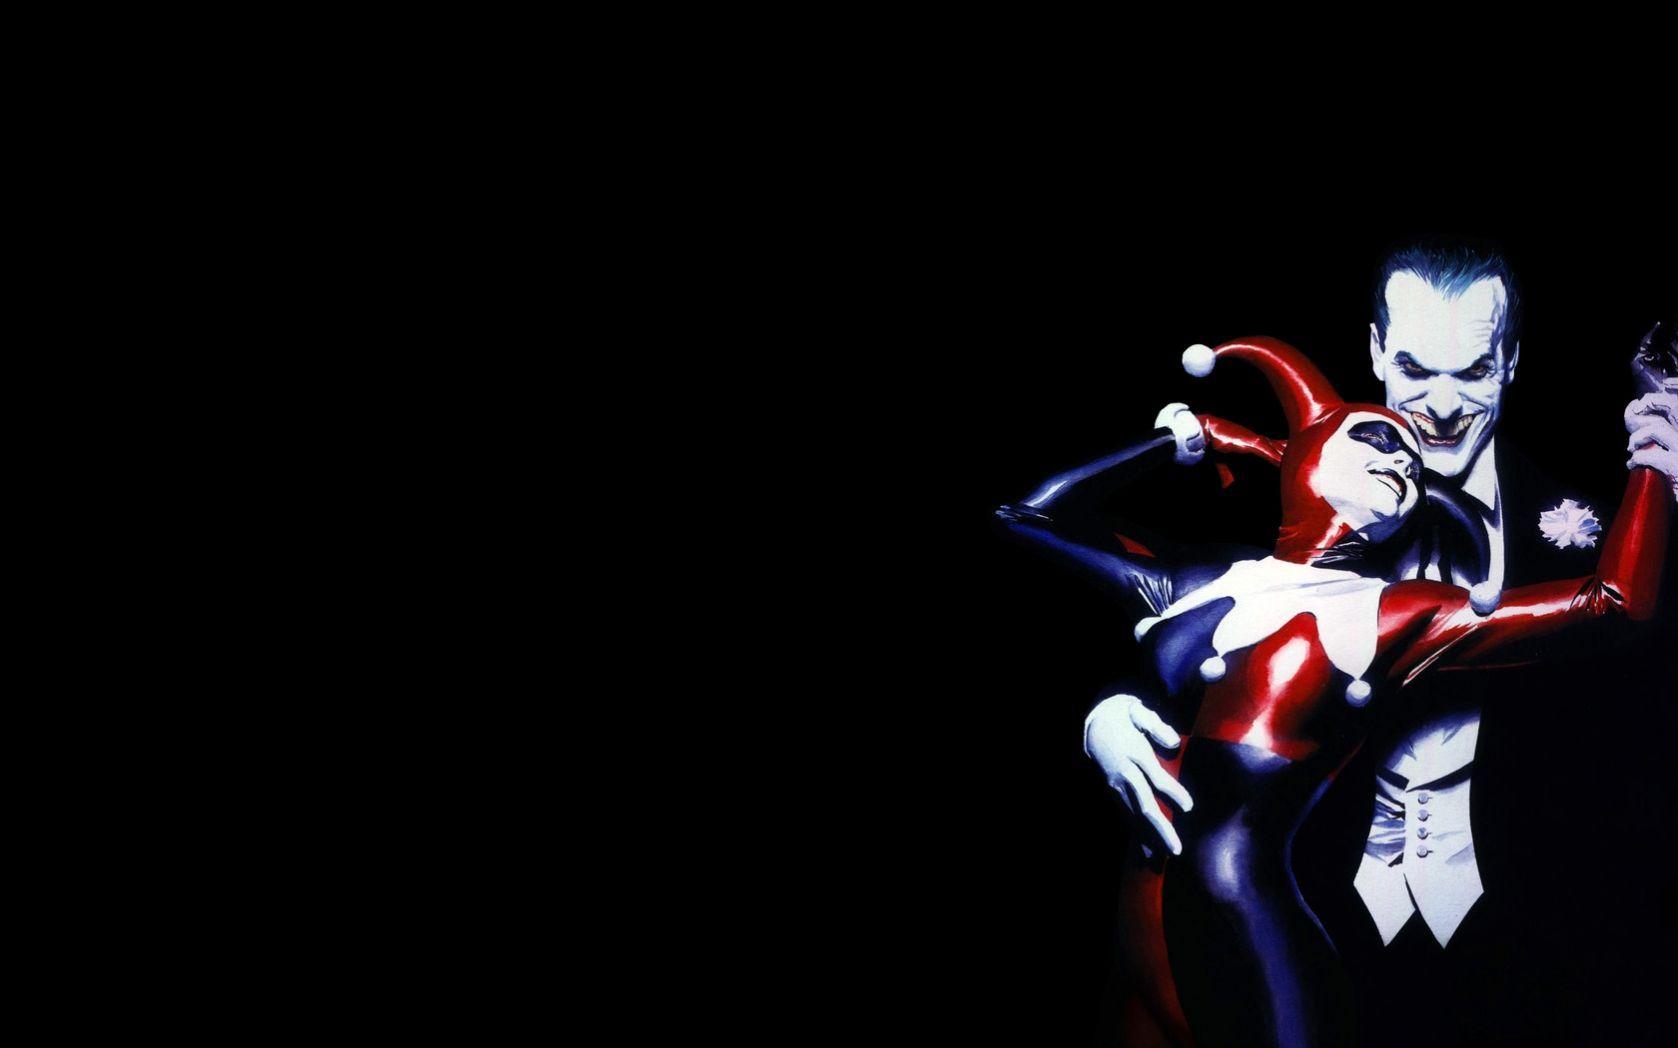 Check out Joker Dancing HD Wallpapers. We add quality wallpapers